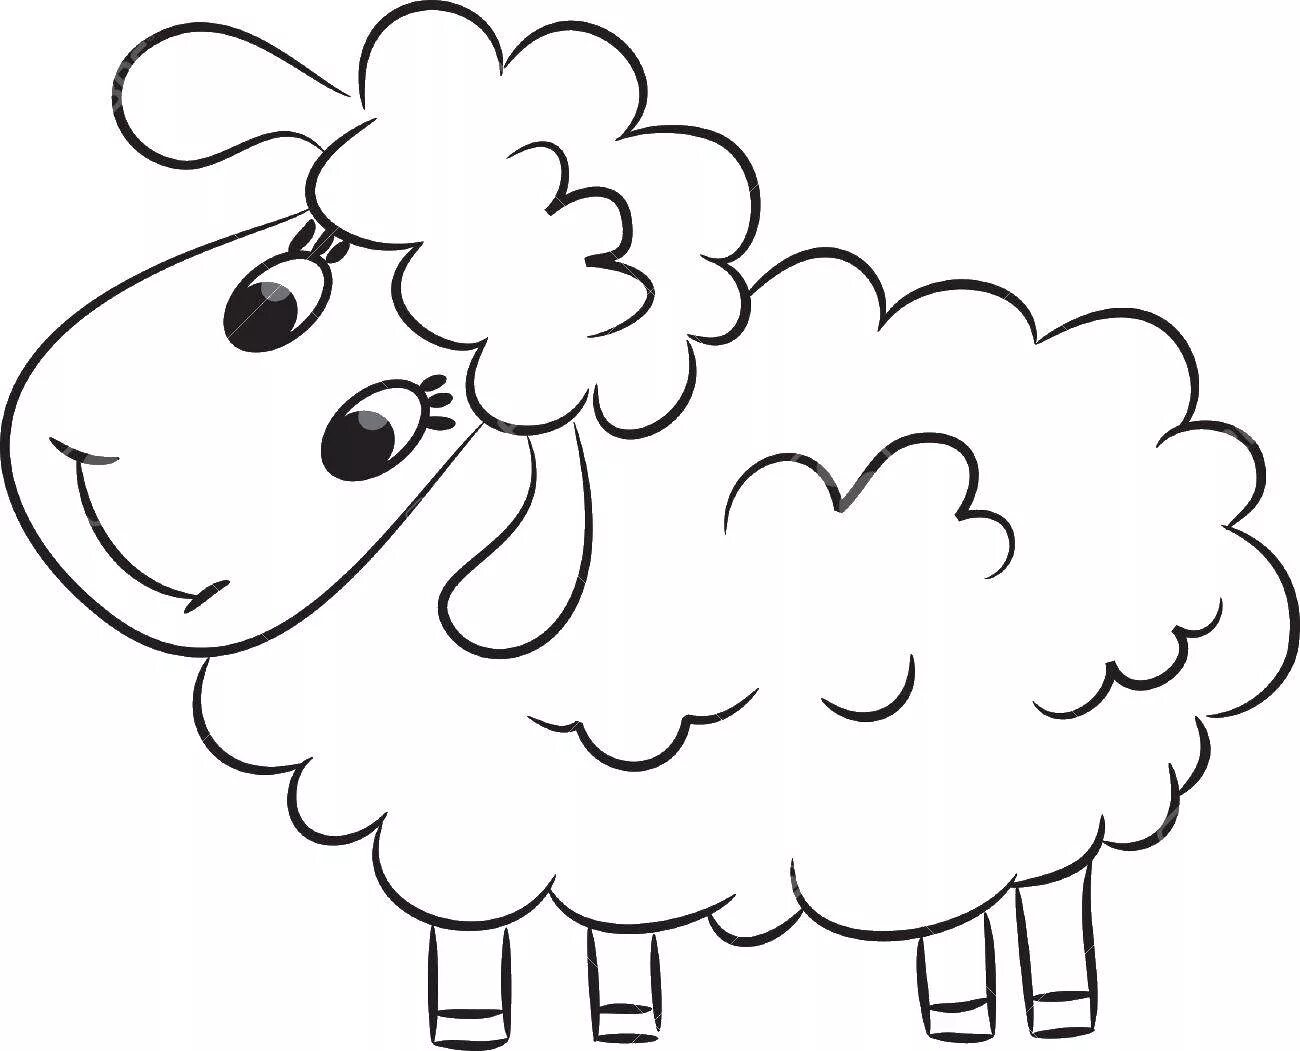 Soft coloring book lamb for children 2-3 years old